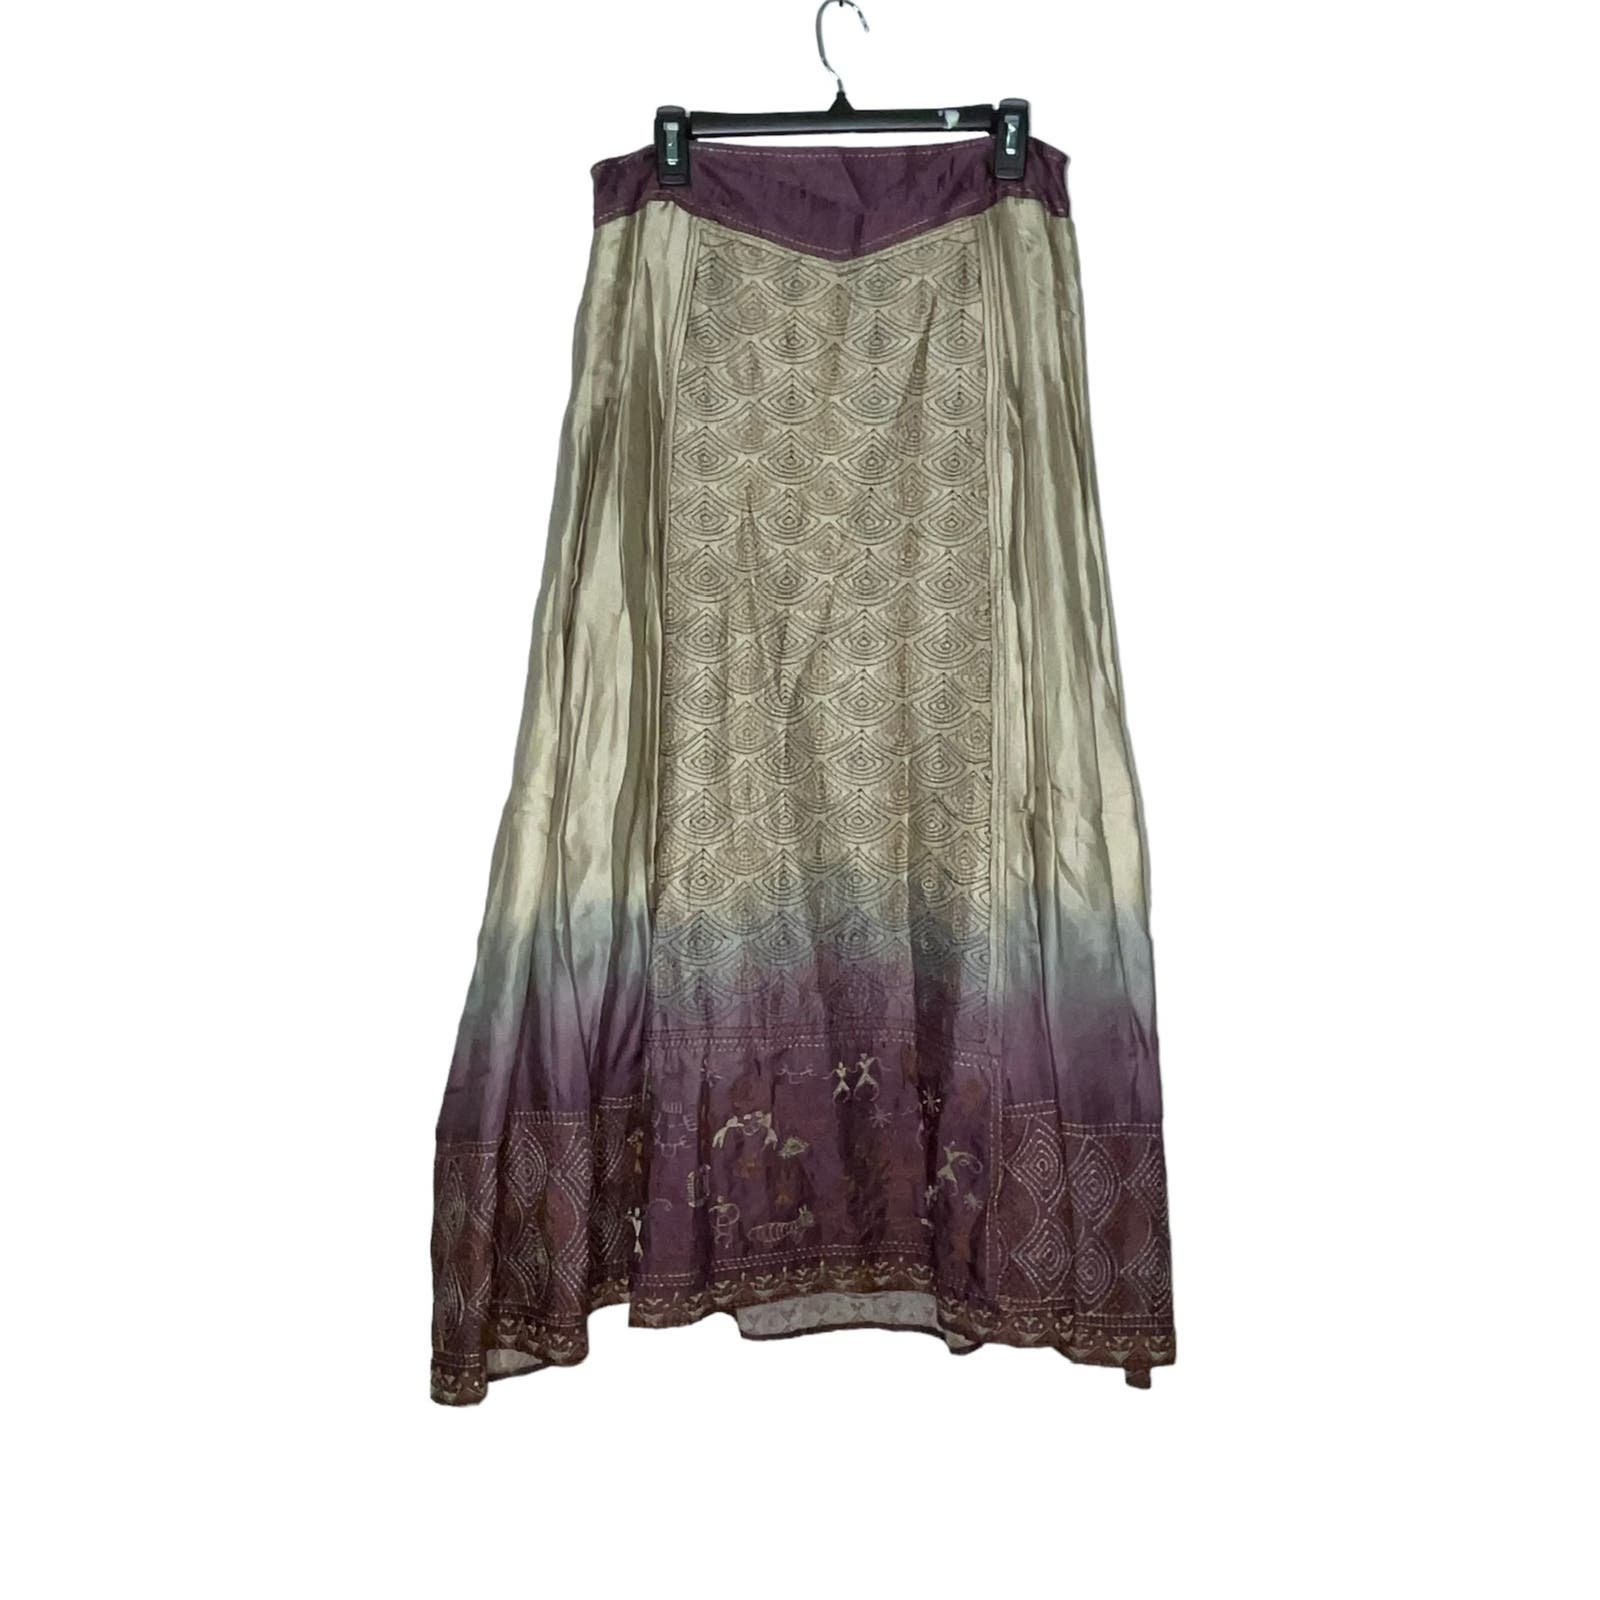 High quality Soft Surroundings Skirt Embroidered Maxi G